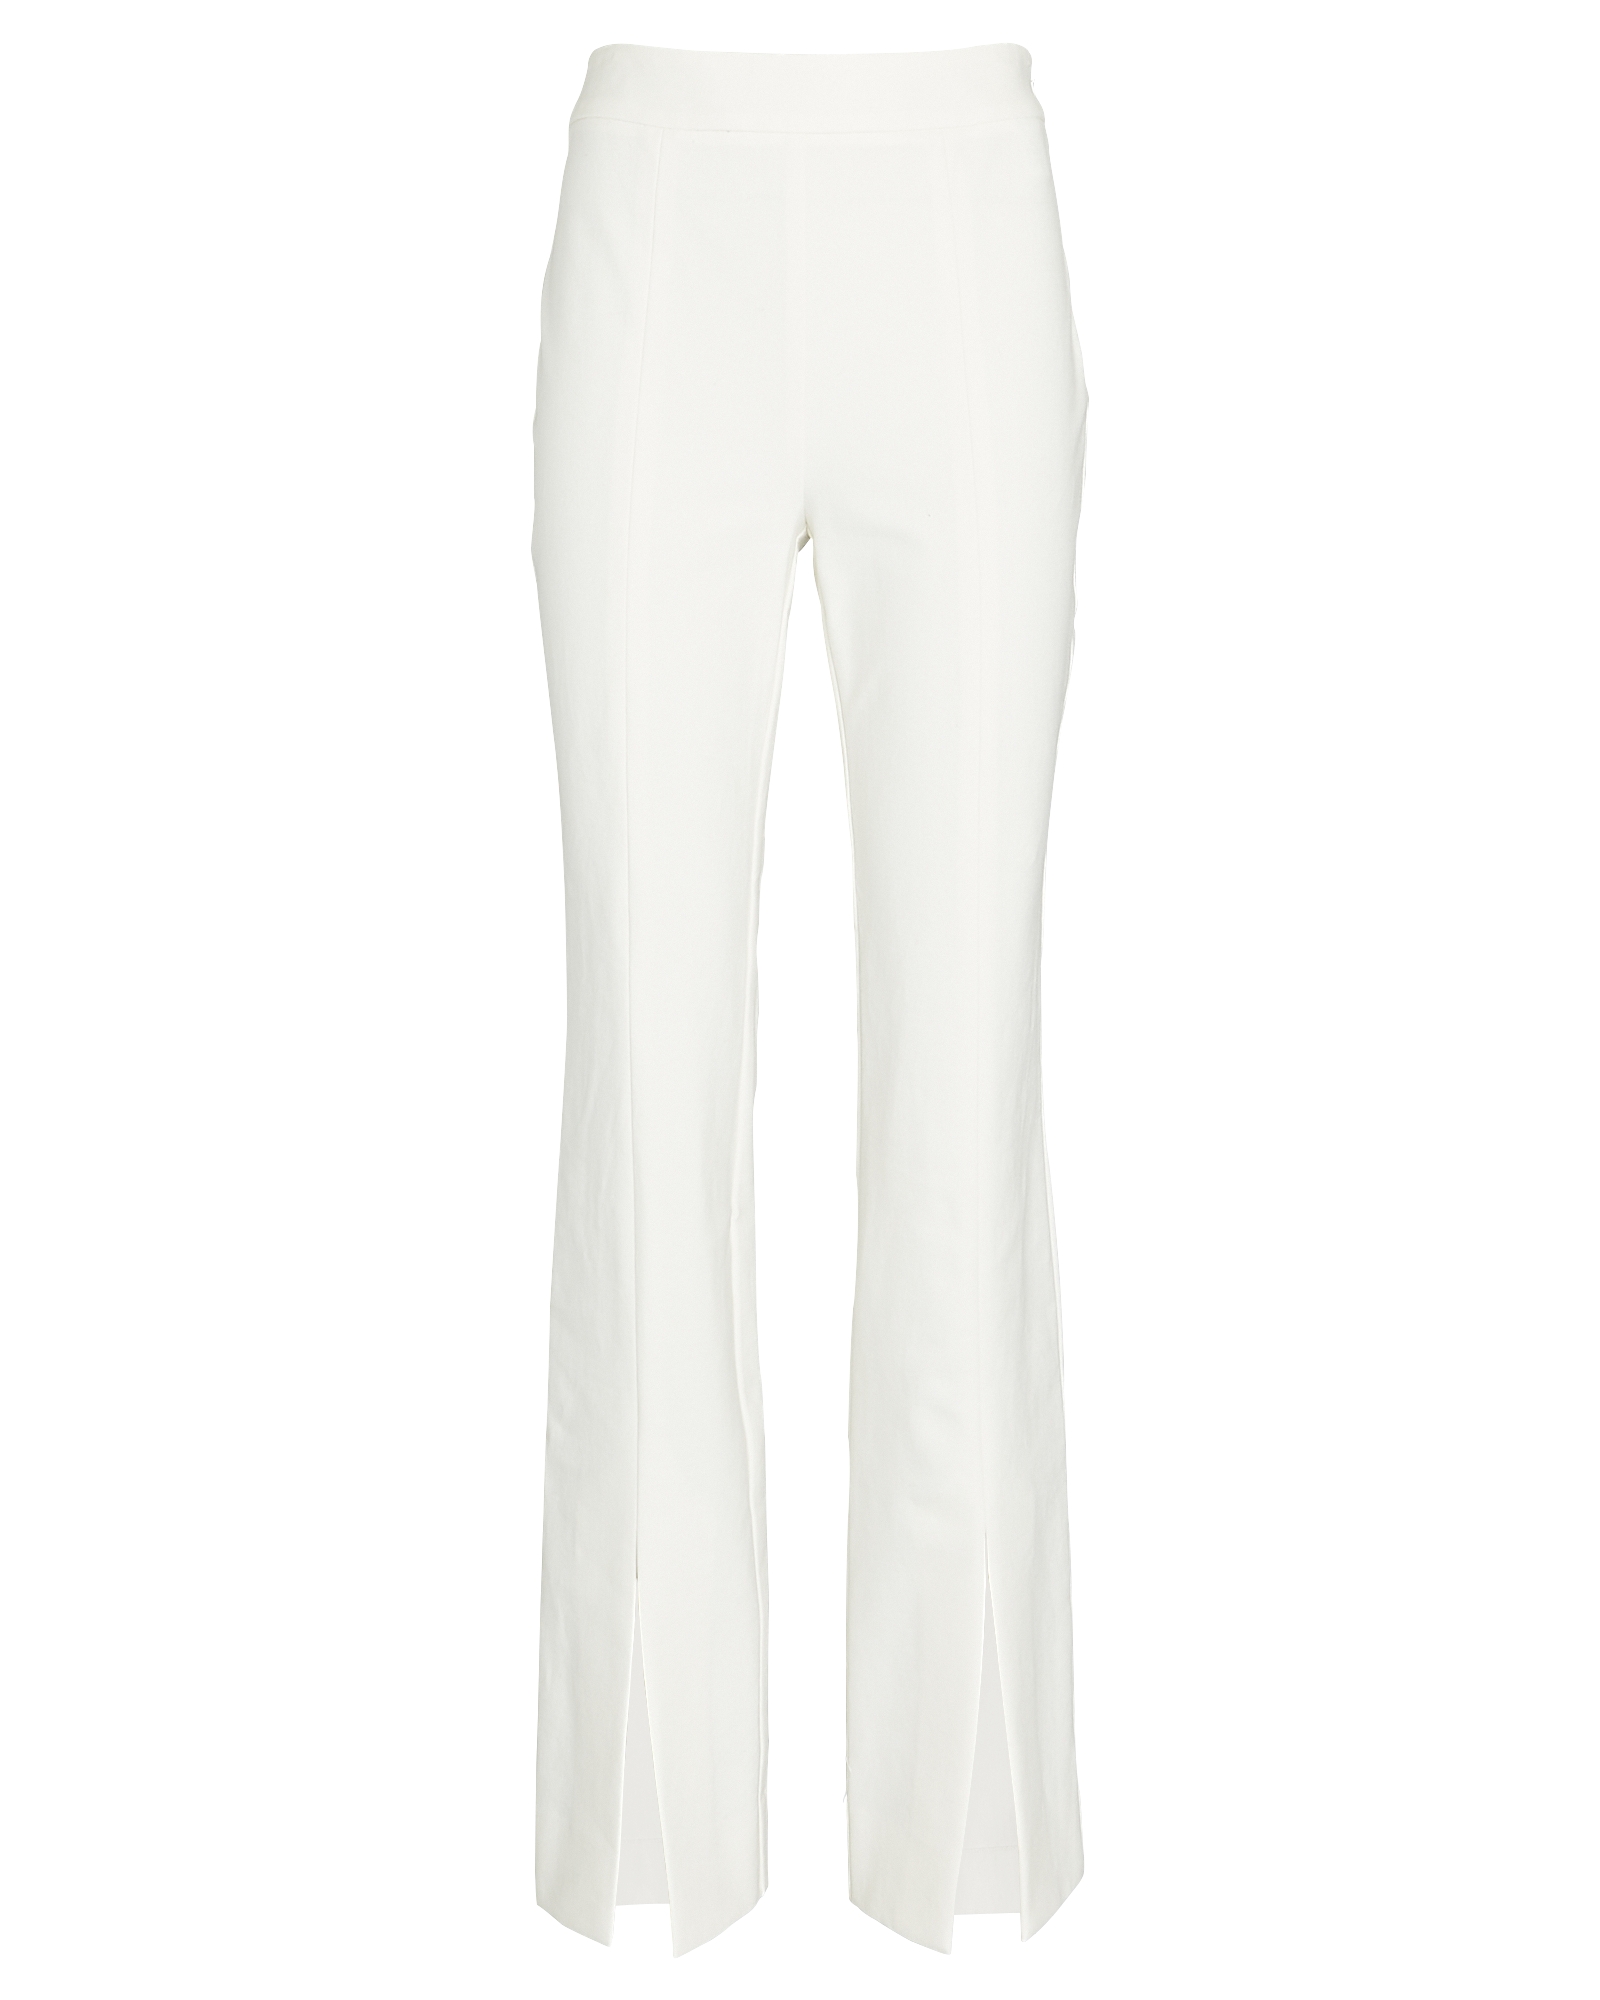 Derek Lam 10 Crosby Lucia Flared Slit Trousers in White | INTERMIX®